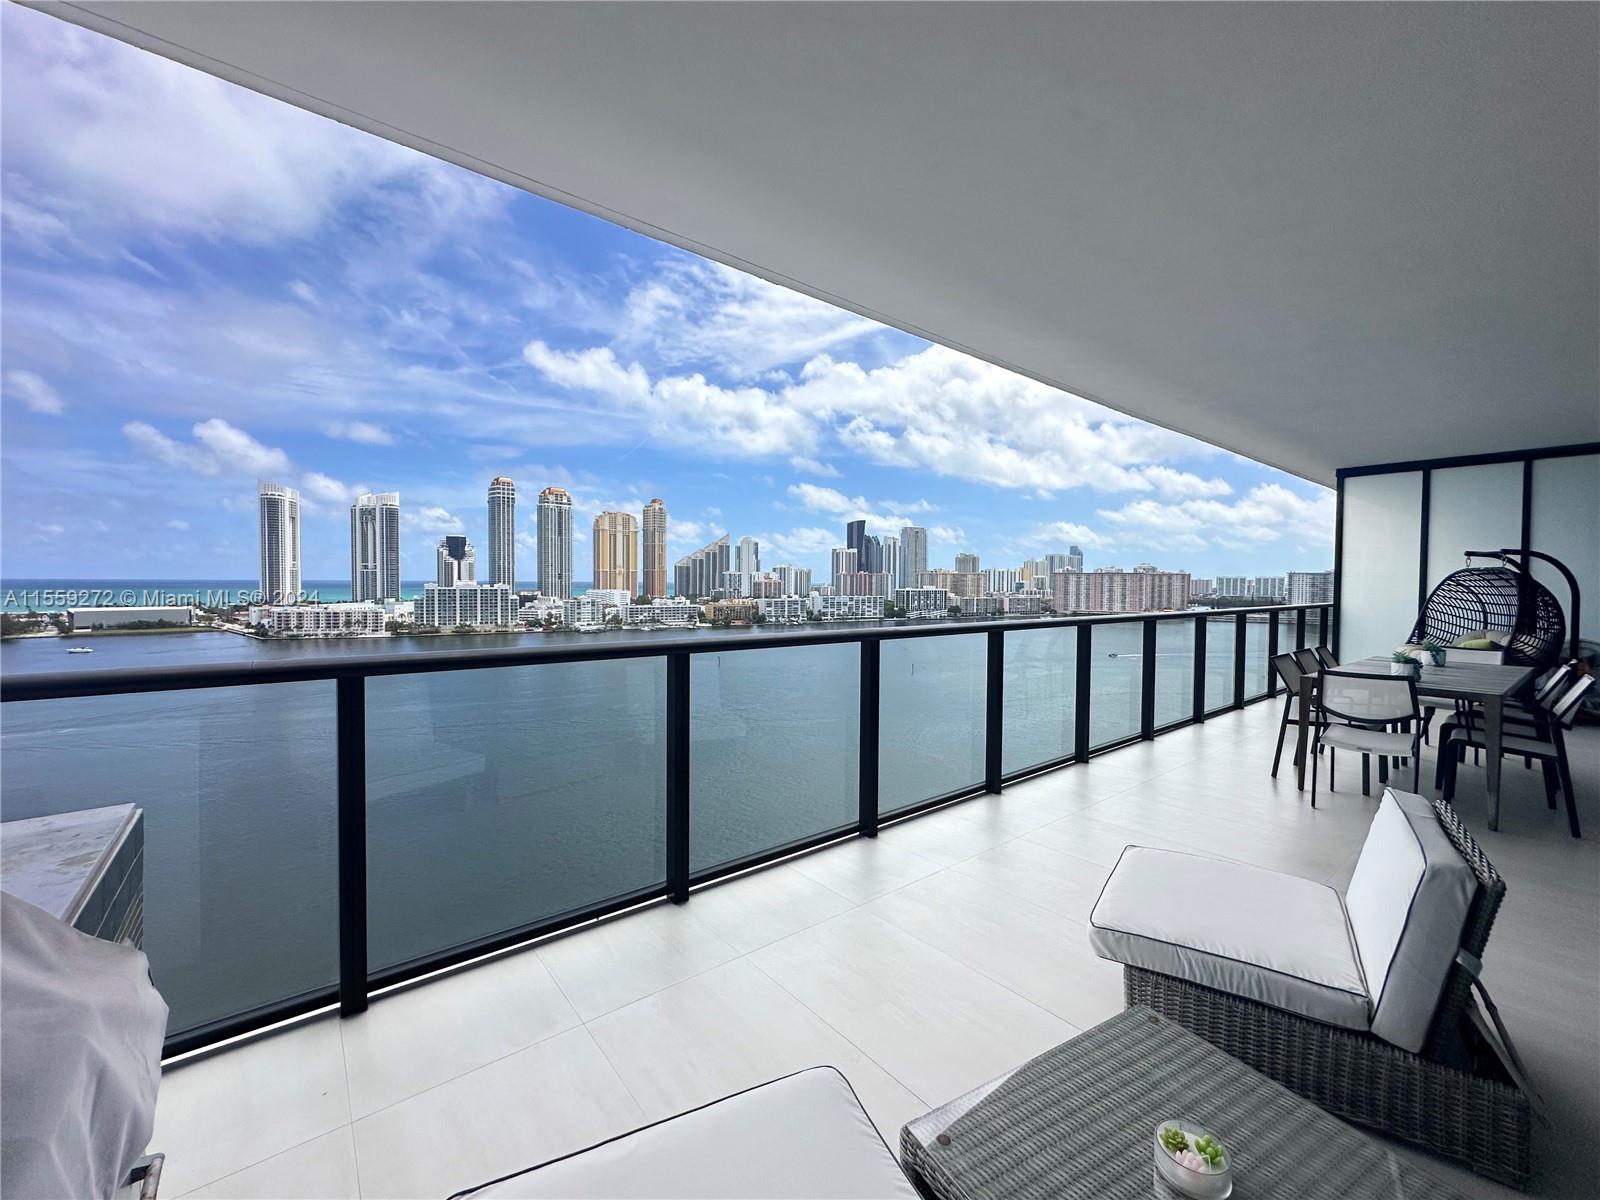 Amazing 3 Bedroom 4.5 unit at the Prive Island, enjoy the luxury and privacy of condo living with amazing views to Sunny Isles Skyline. Top of the line appliances and finishes. Unit comes furnished.

Note. Unit is sold with furniture but does NOT include Art or accessories.